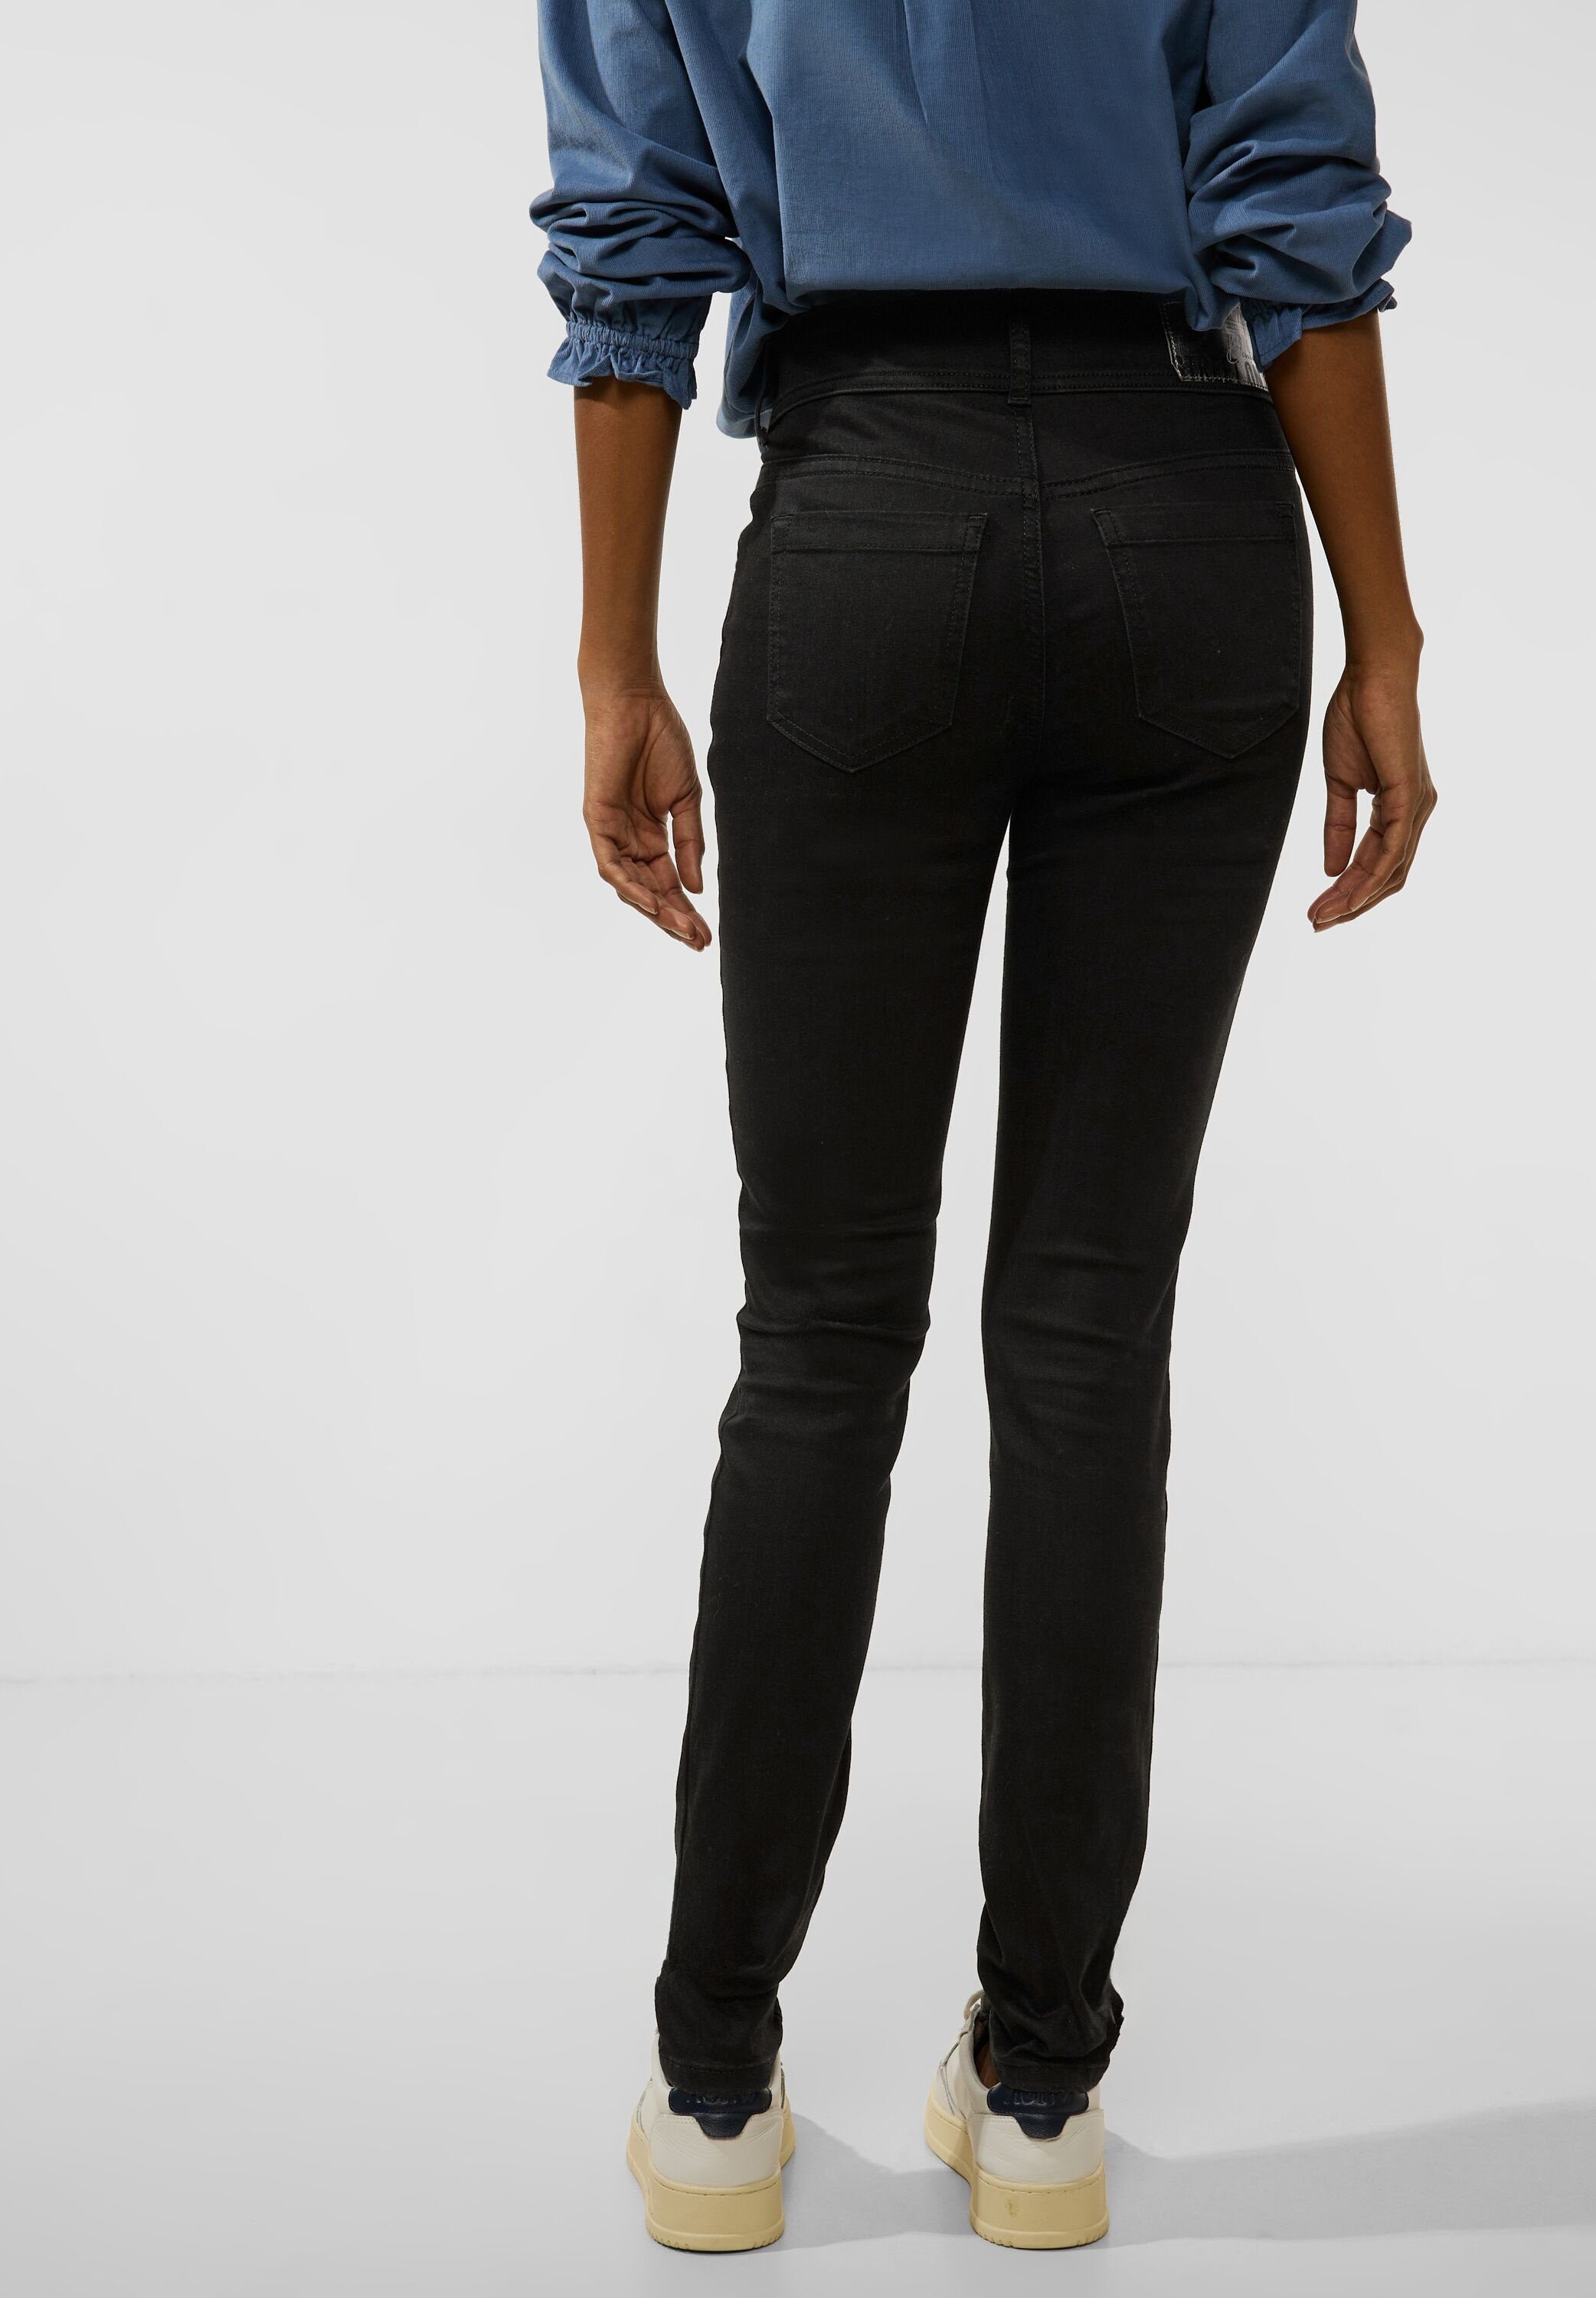 Jeans Dunkle STREET Slim Slim-fit-Jeans Fit ONE